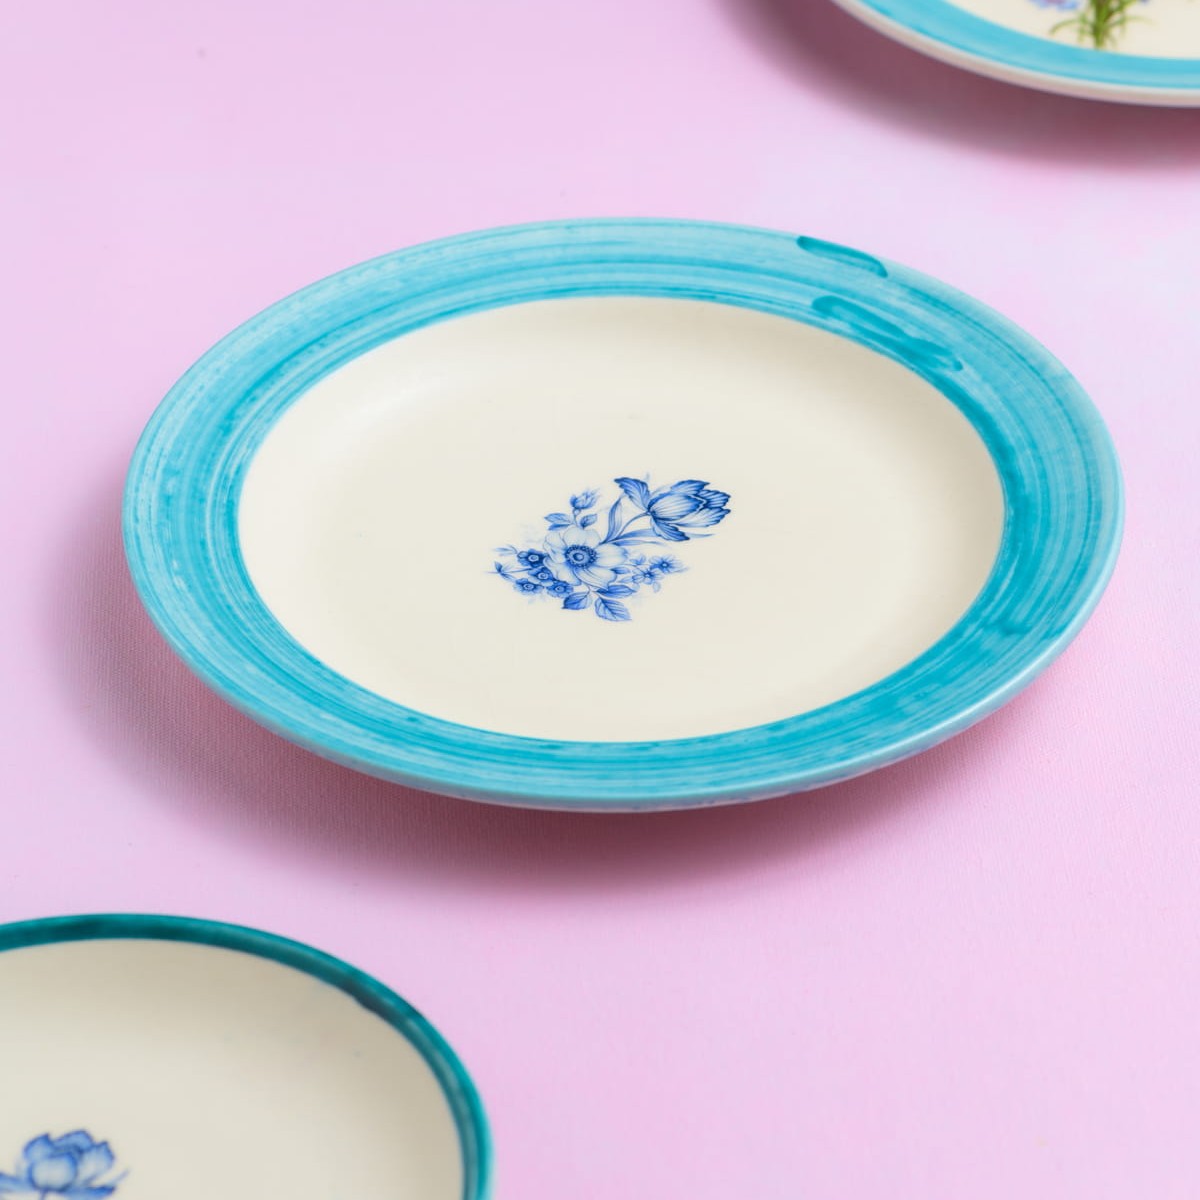 Floral Whispers in Sky Blue Wall Decor Ceramics Plate Set of 3